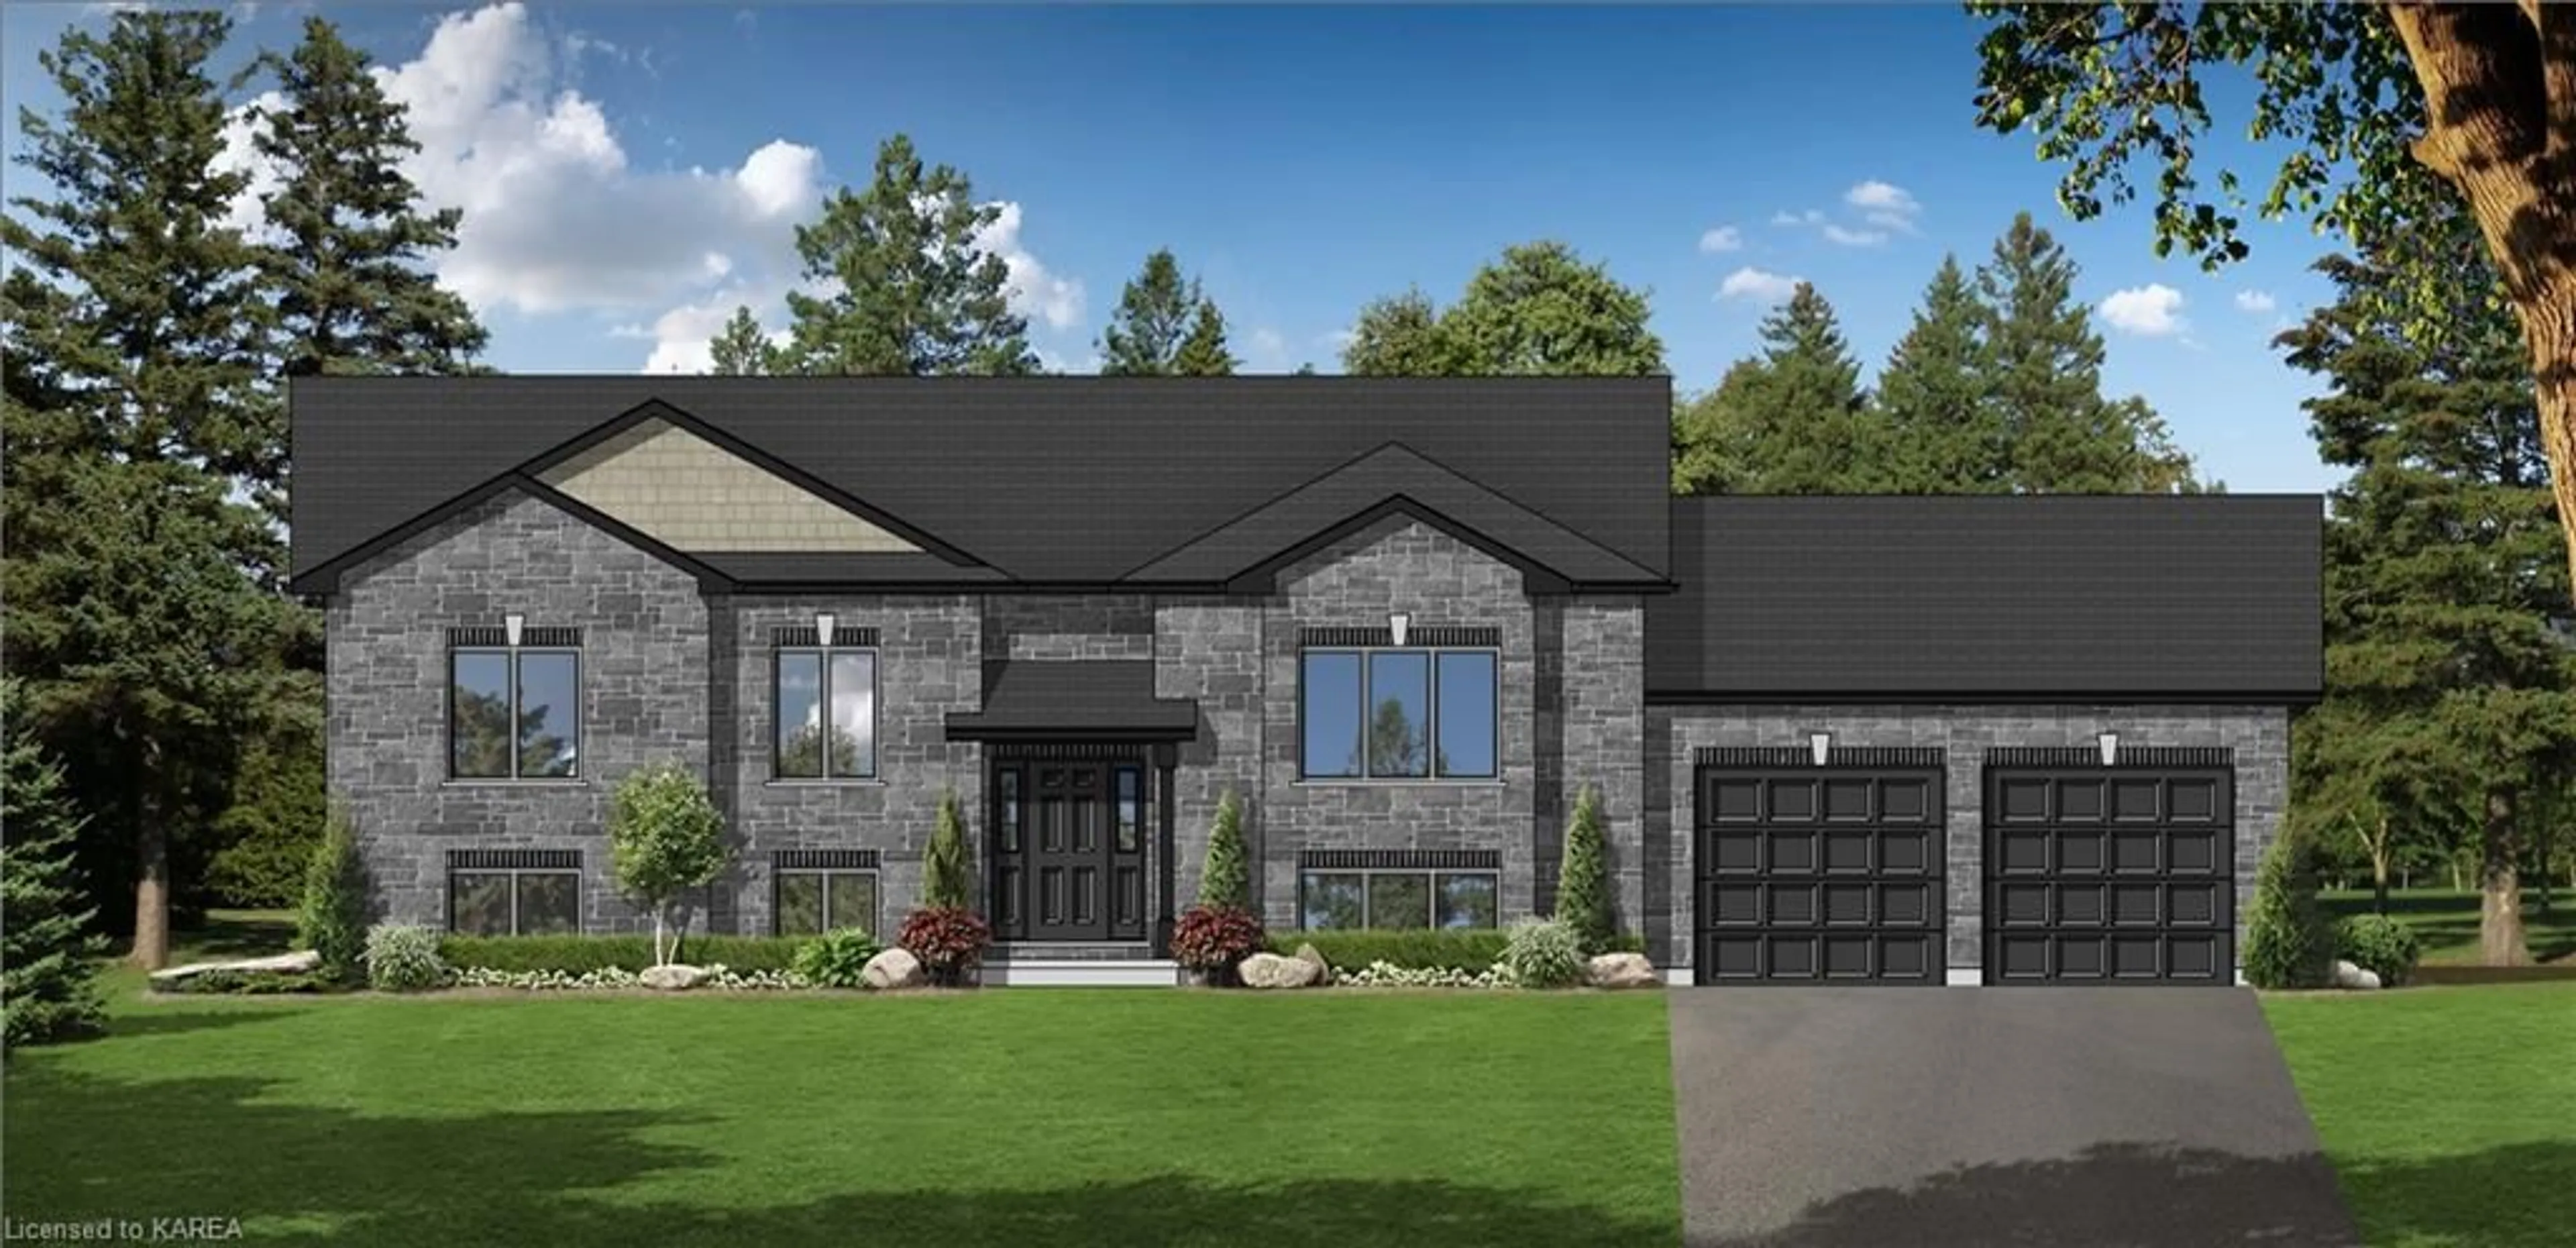 Home with brick exterior material for 108 Bittersweet Rd, Harrington Ontario K0H 1W0